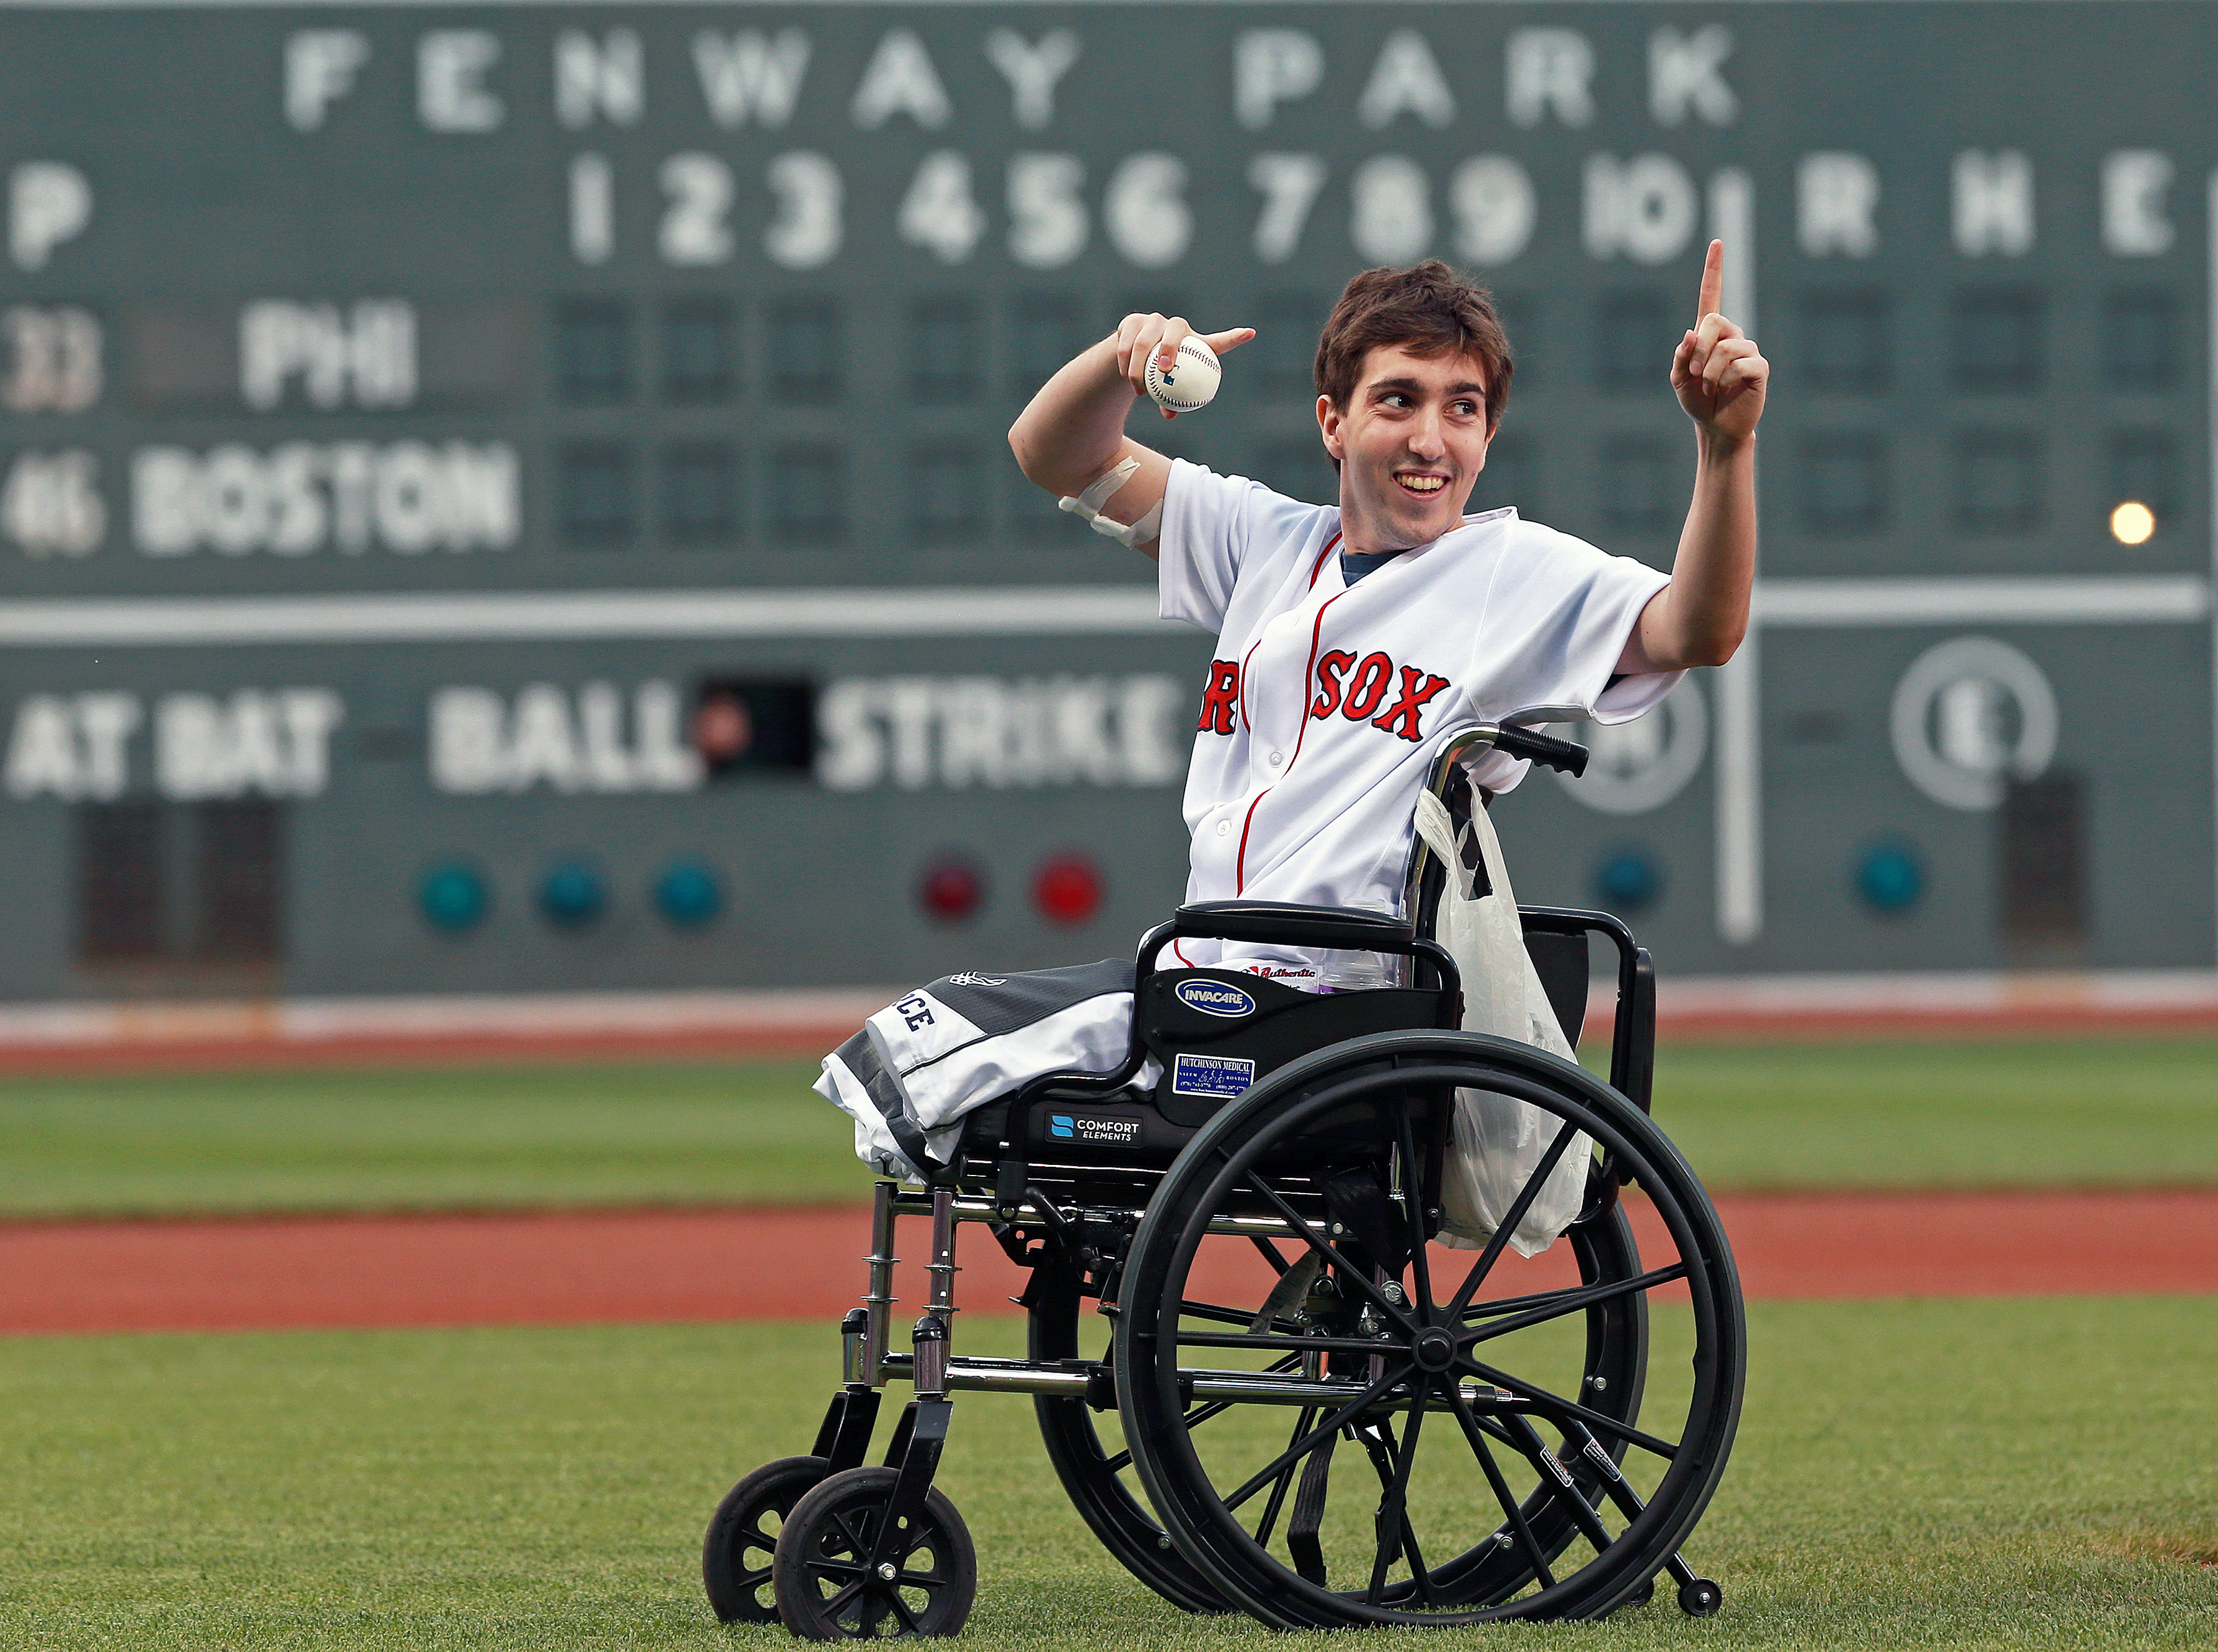 Boston Marathon bombing victim Jeff Bauman threw out a ceremonial first pitch on May 28, 2013, at Boston's Fenway Park, where the Philadelphia Phillies played the Red Sox in a regular-season baseball game. (Jim Davis—The Boston Globe/Getty Images)